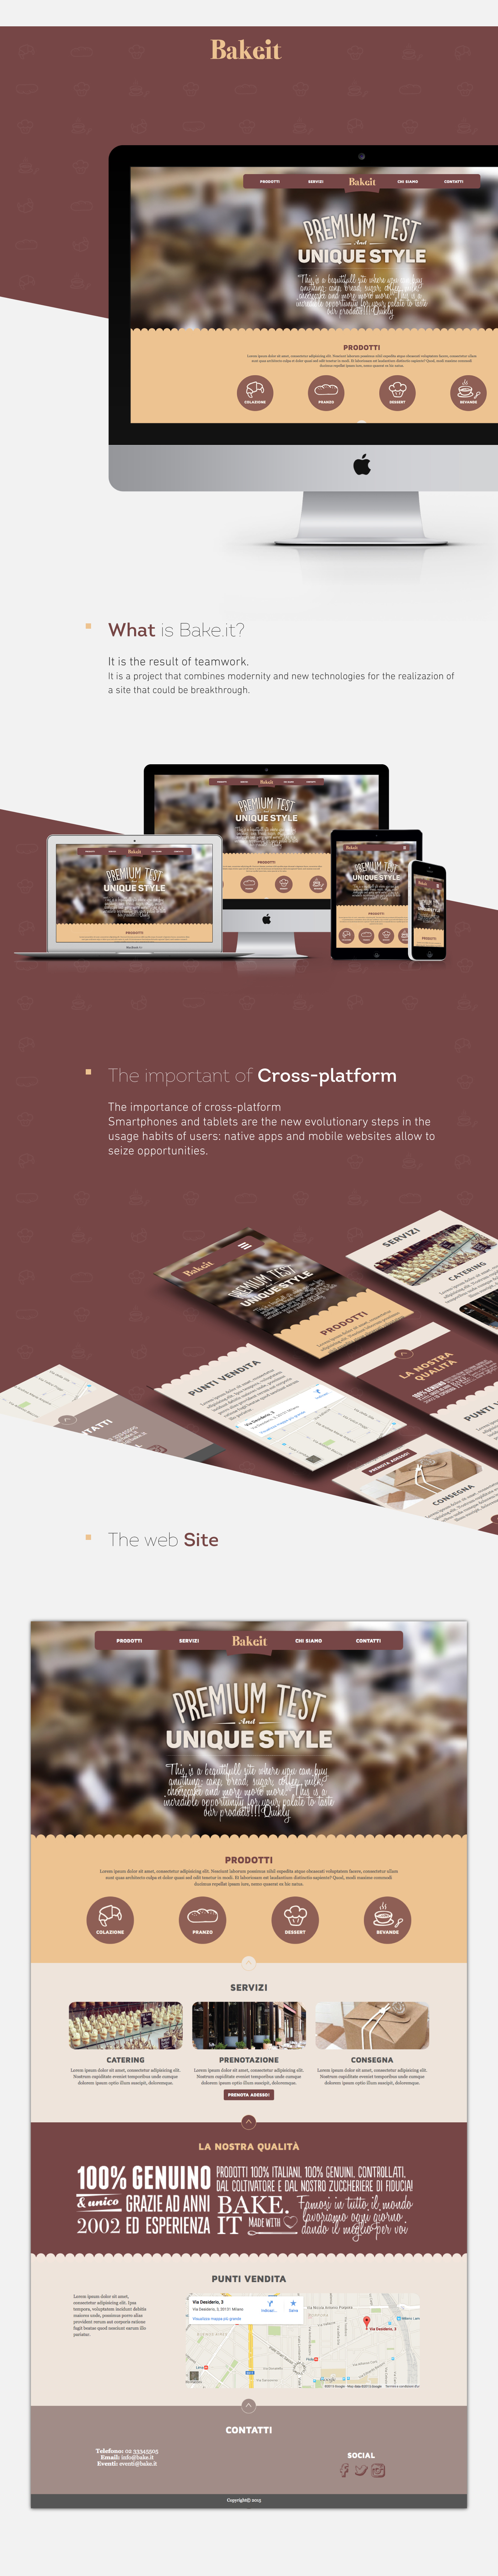 bake bakery Responsive landing page One Page UI ux clear design